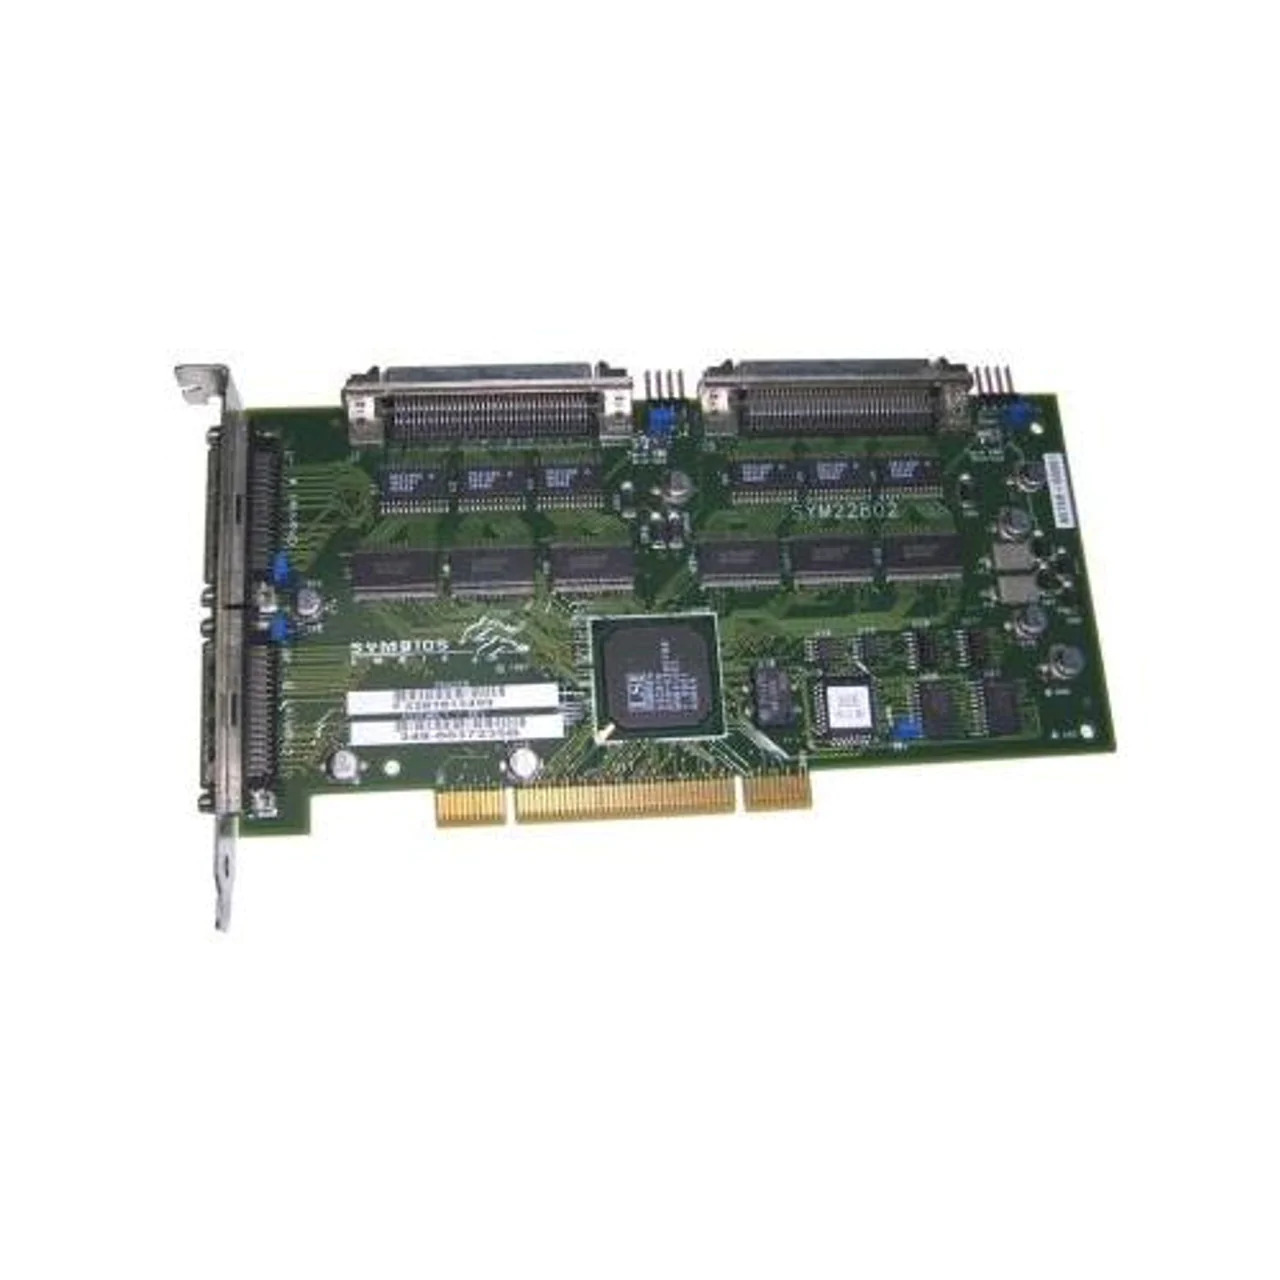 HP Dual-Ports Fast Wide SCSI PCI Network Adapter